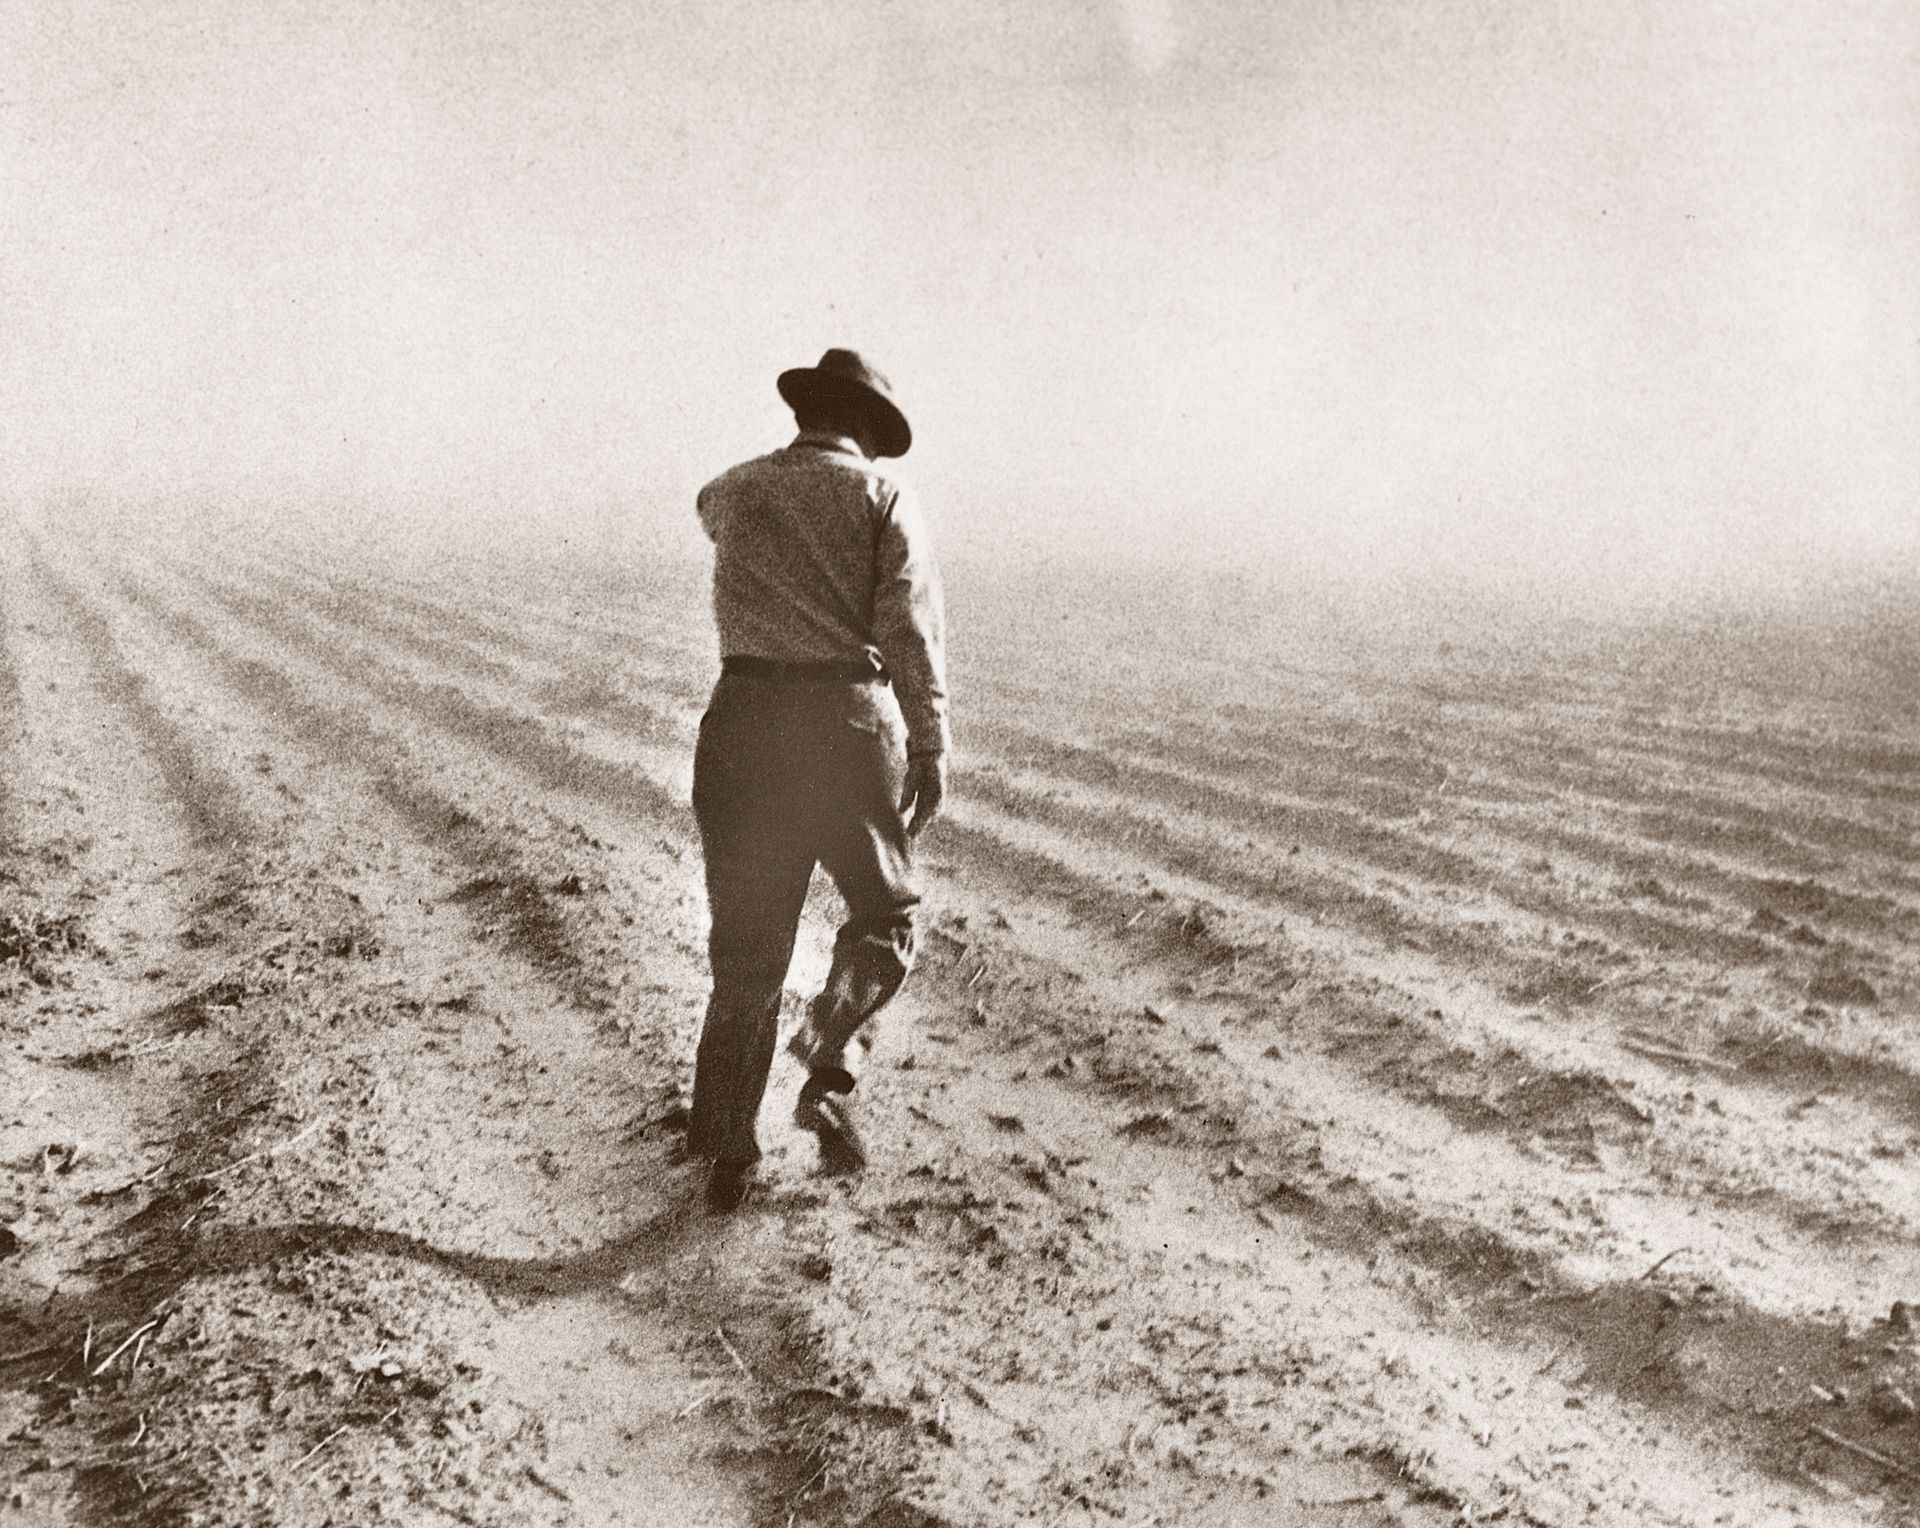 Ezra Taft Benson walking and inspecting a field during a drought.